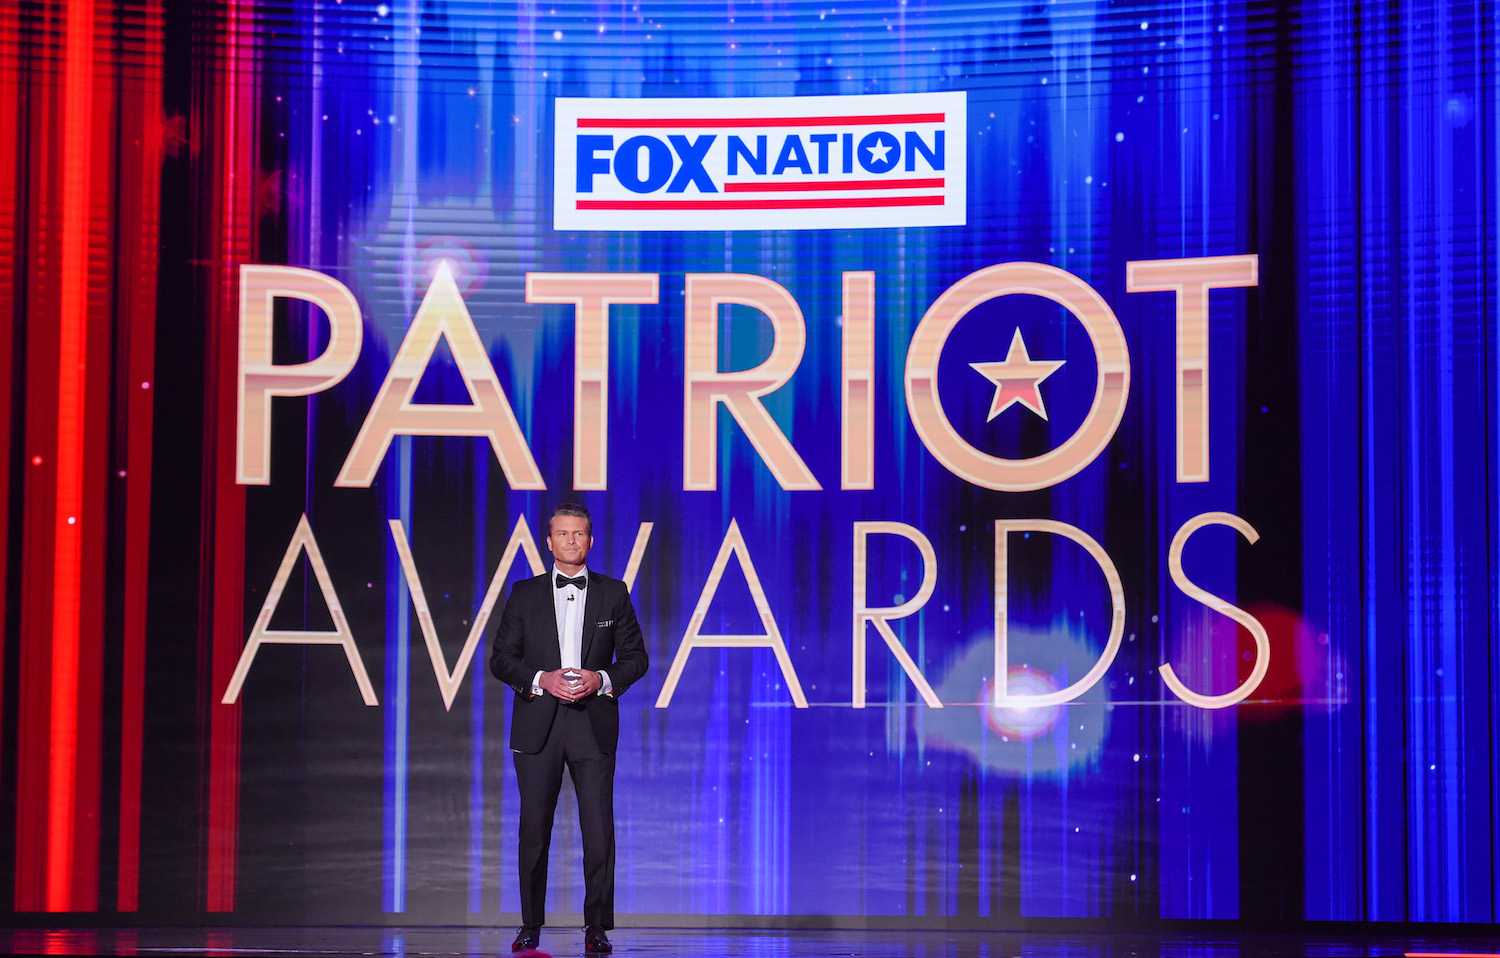 FOX Nation’s Fourth Annual Patriot Awards with Performance by Michael